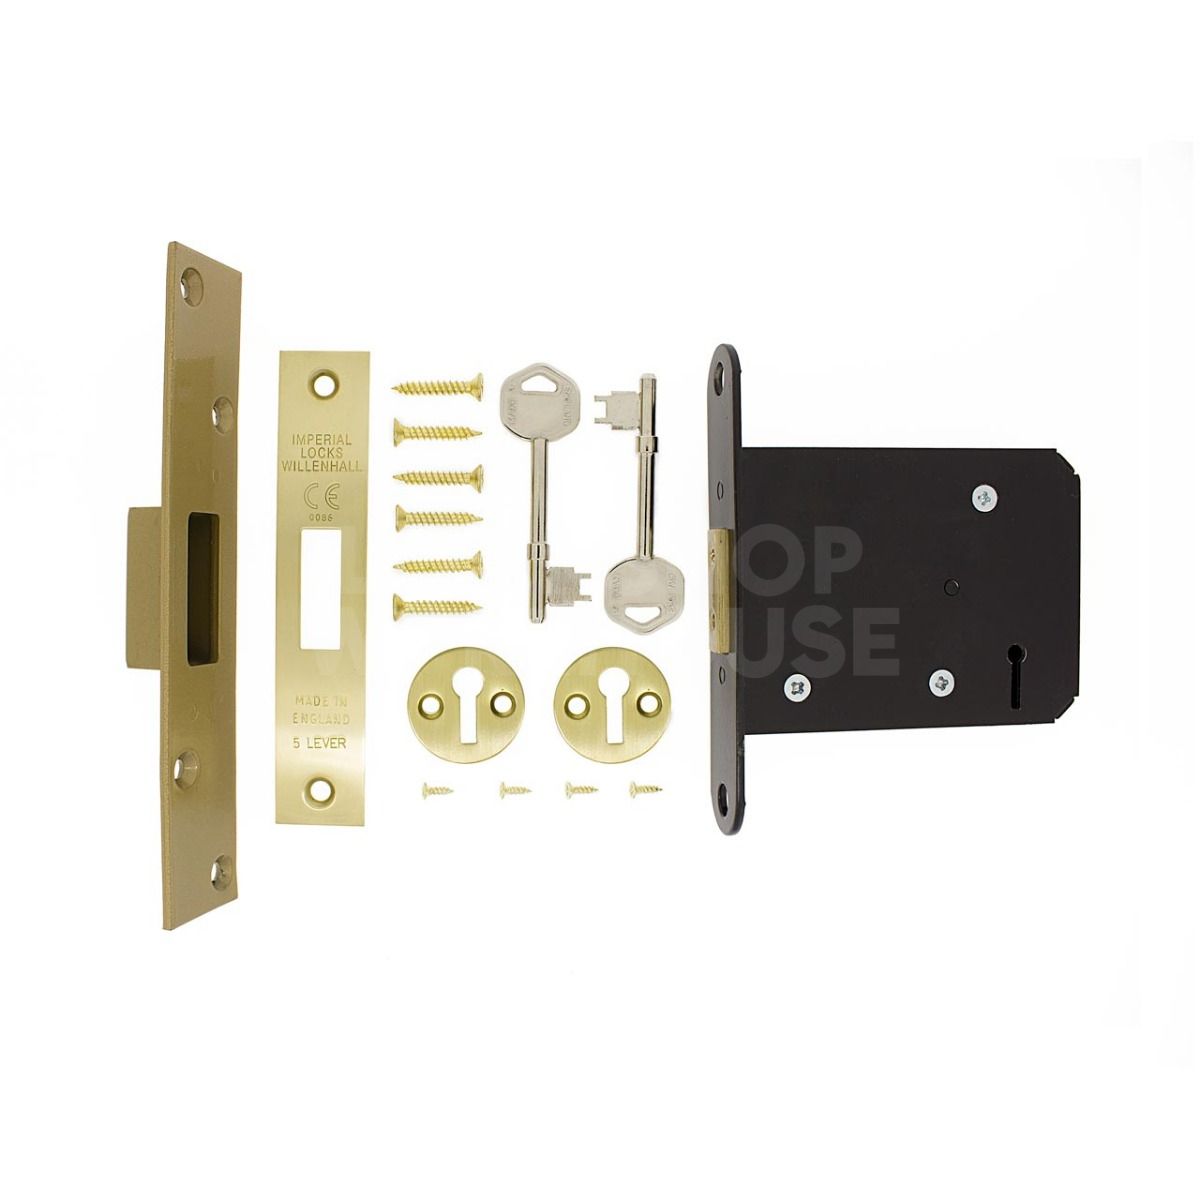 Dimensions Image: Imperial G5004 5 lever Deadlock - 101mm (4inch) case